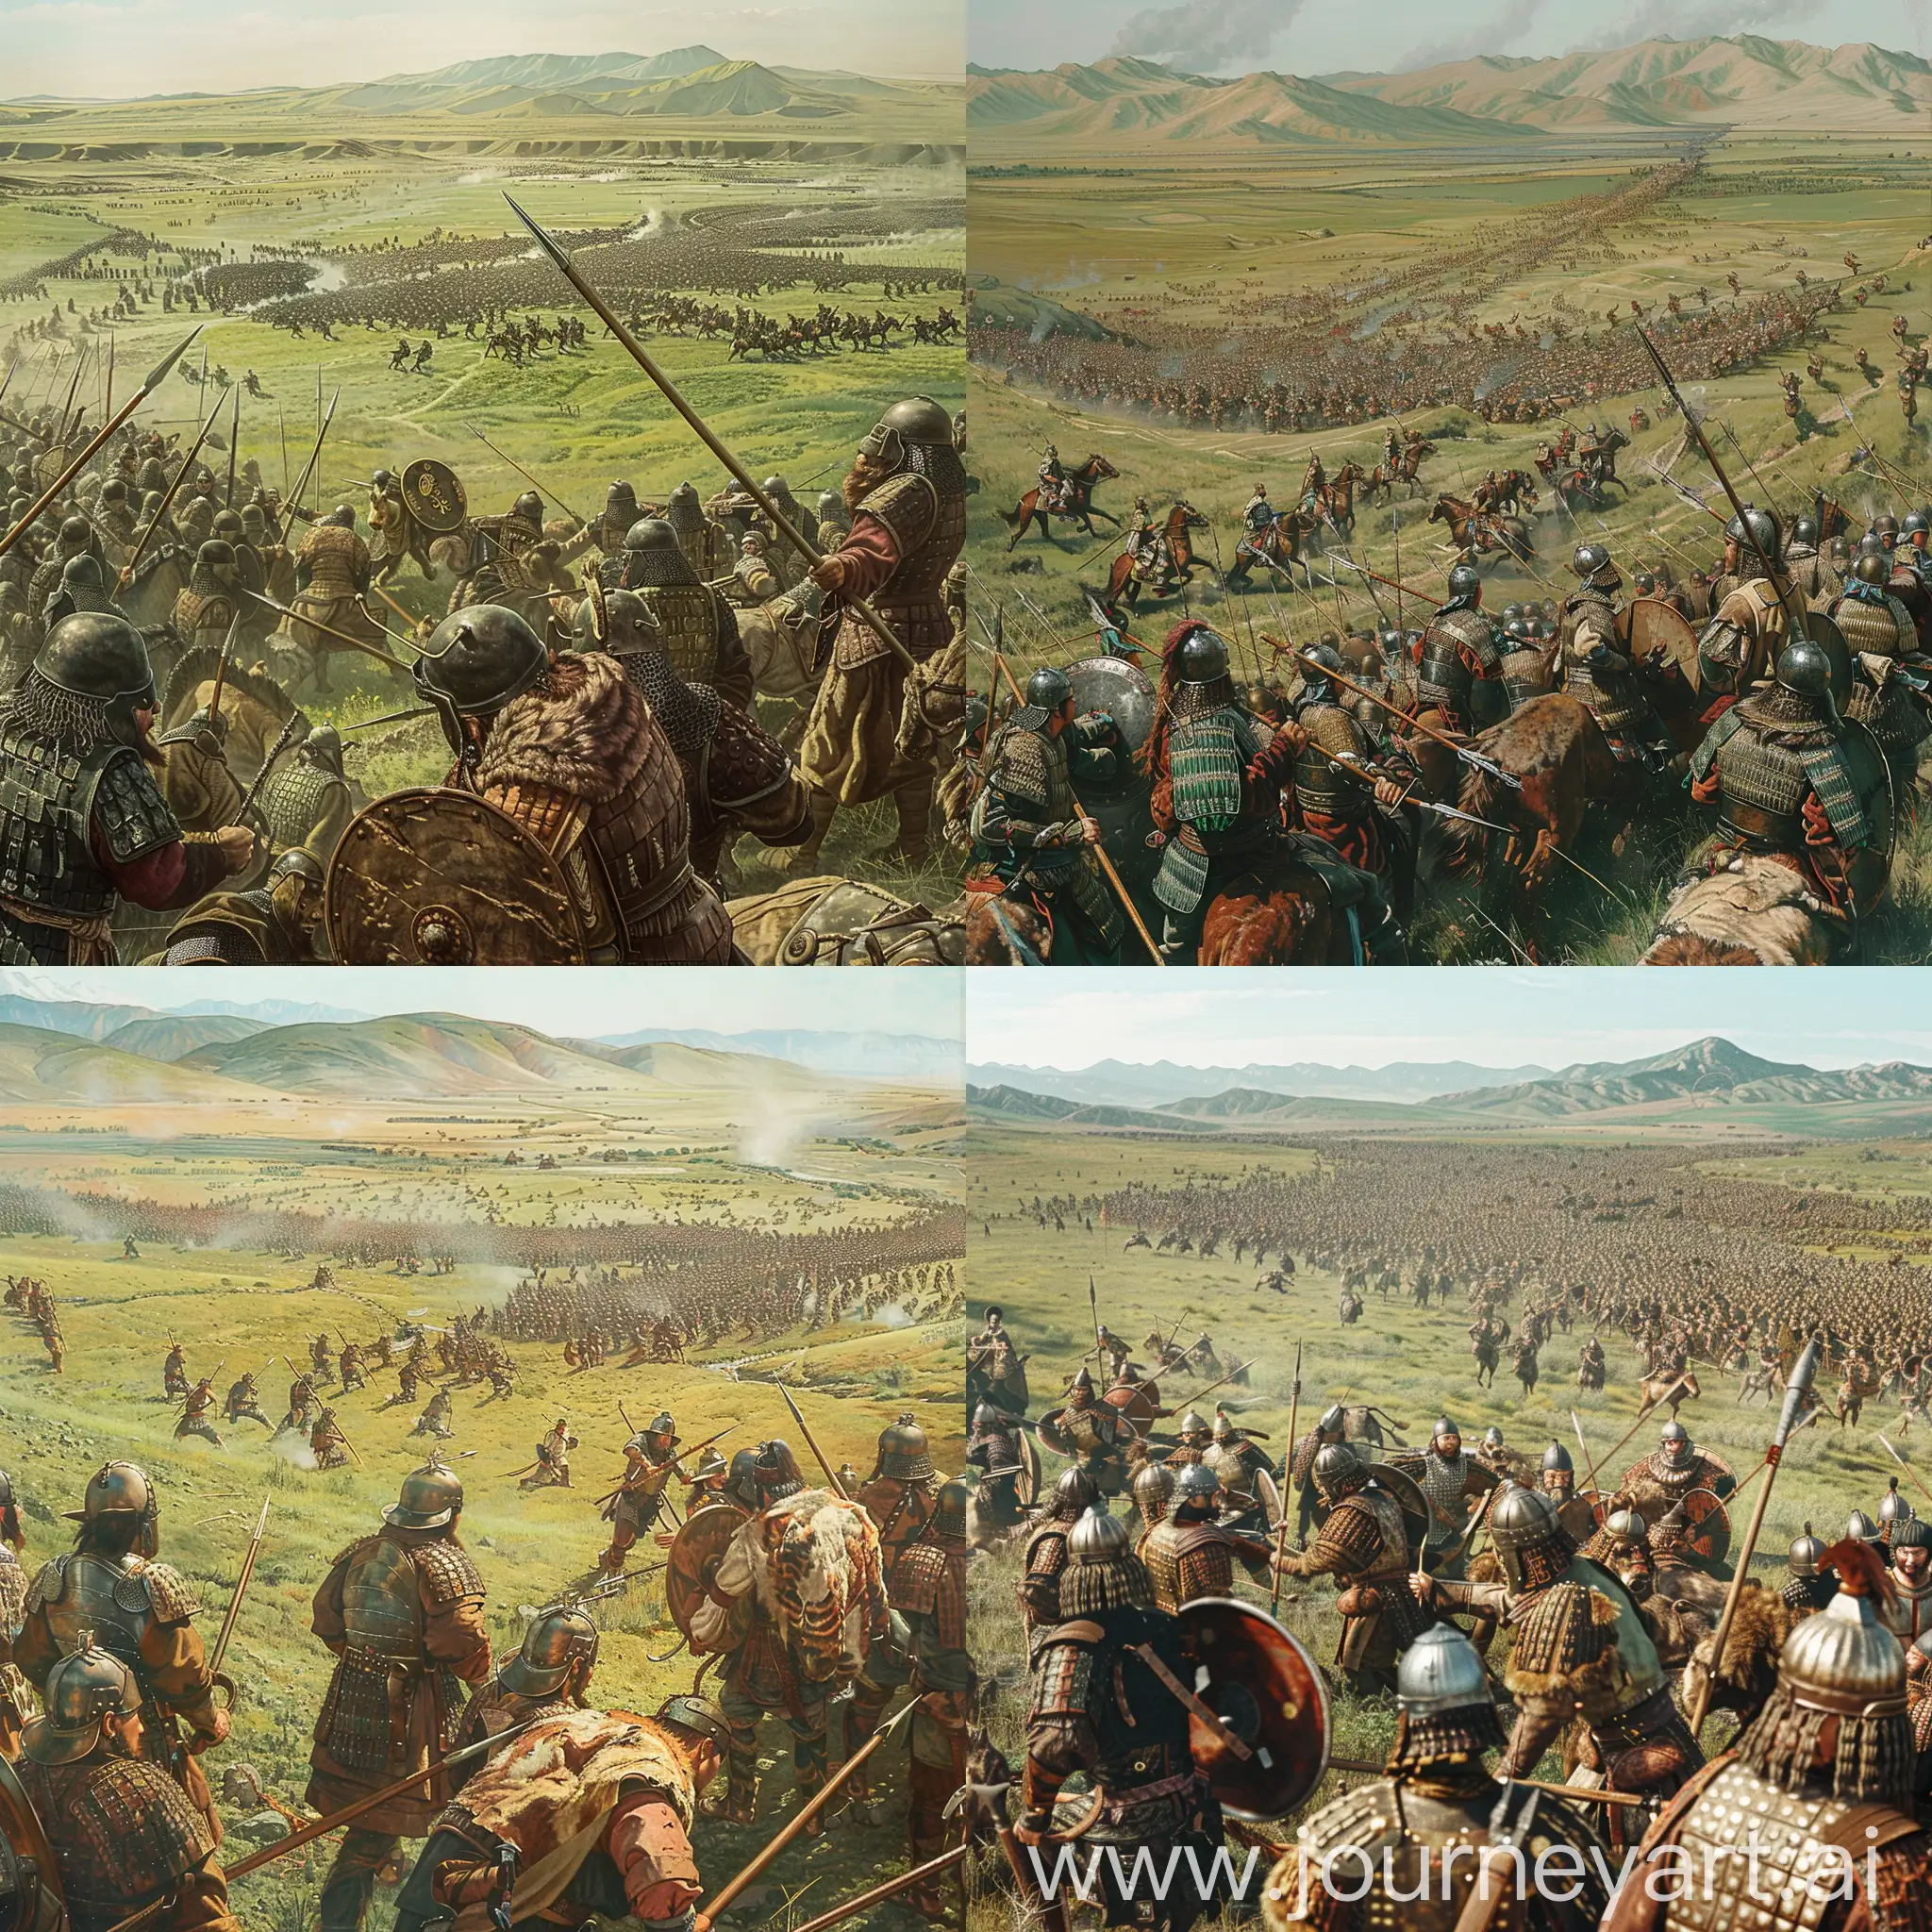 The battle on the steppe featured Qin soldiers wearing armor and helmets, using spears, fighting against nomadic enemies wearing animal skins and wielding curved swords. The landscape is plain, green grass, hills and mountains in the distance. Observation angle from above, giving a panoramic view and huge-sized armies